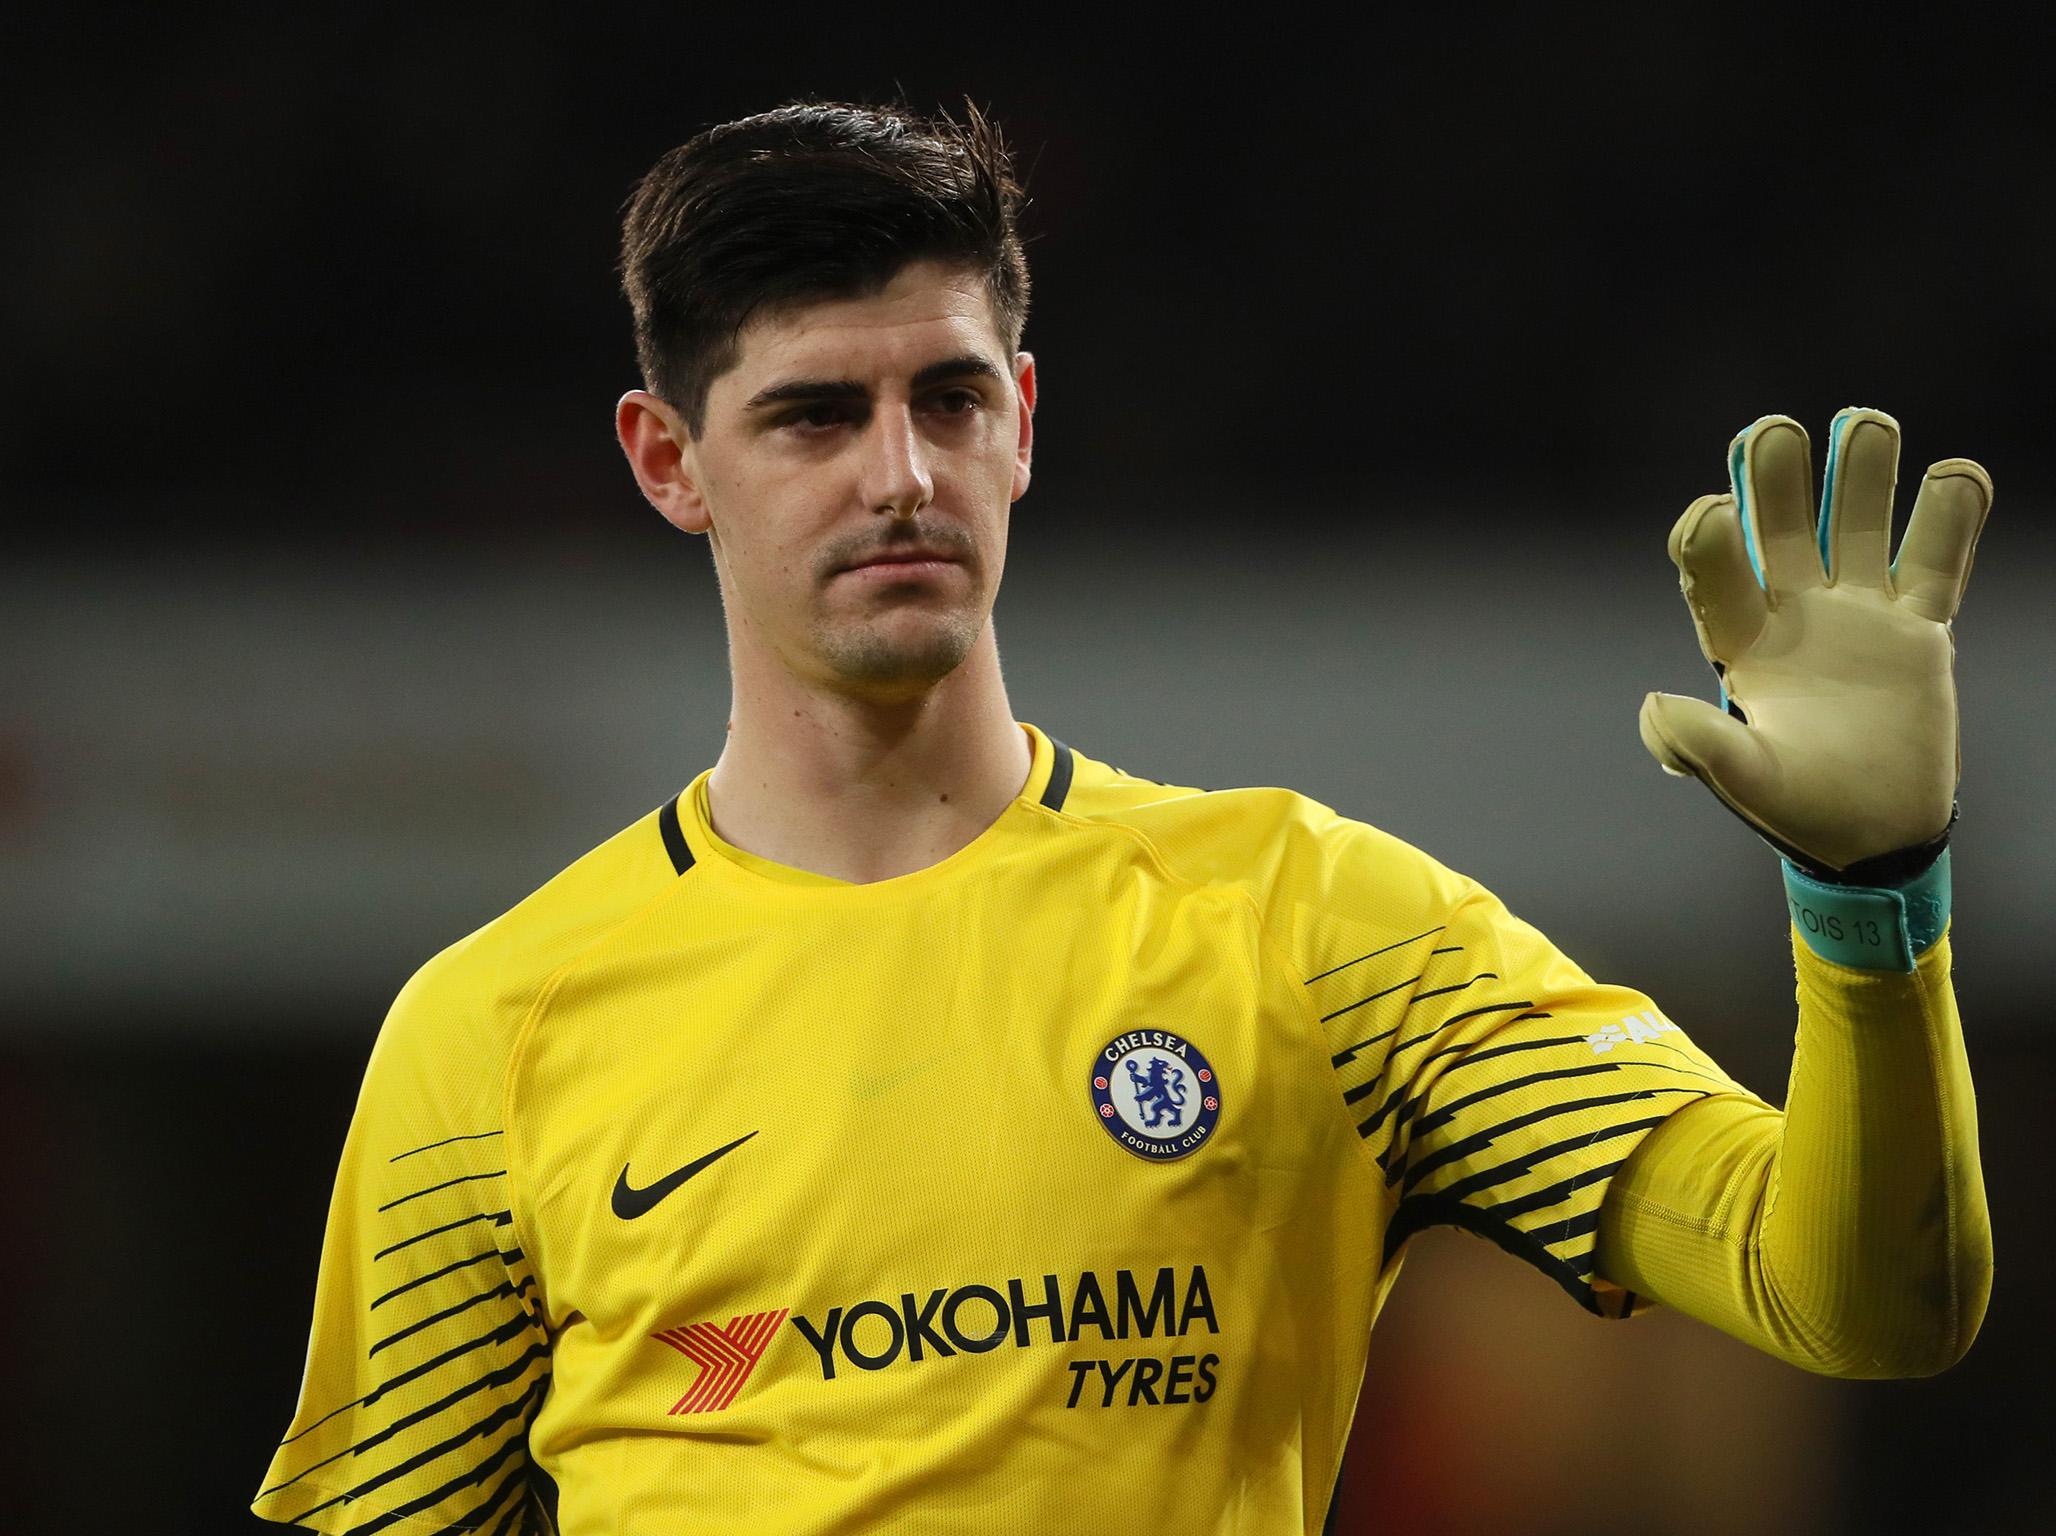 Courtois finds himself in a strong position with Real Madrid keen and an extension overdue